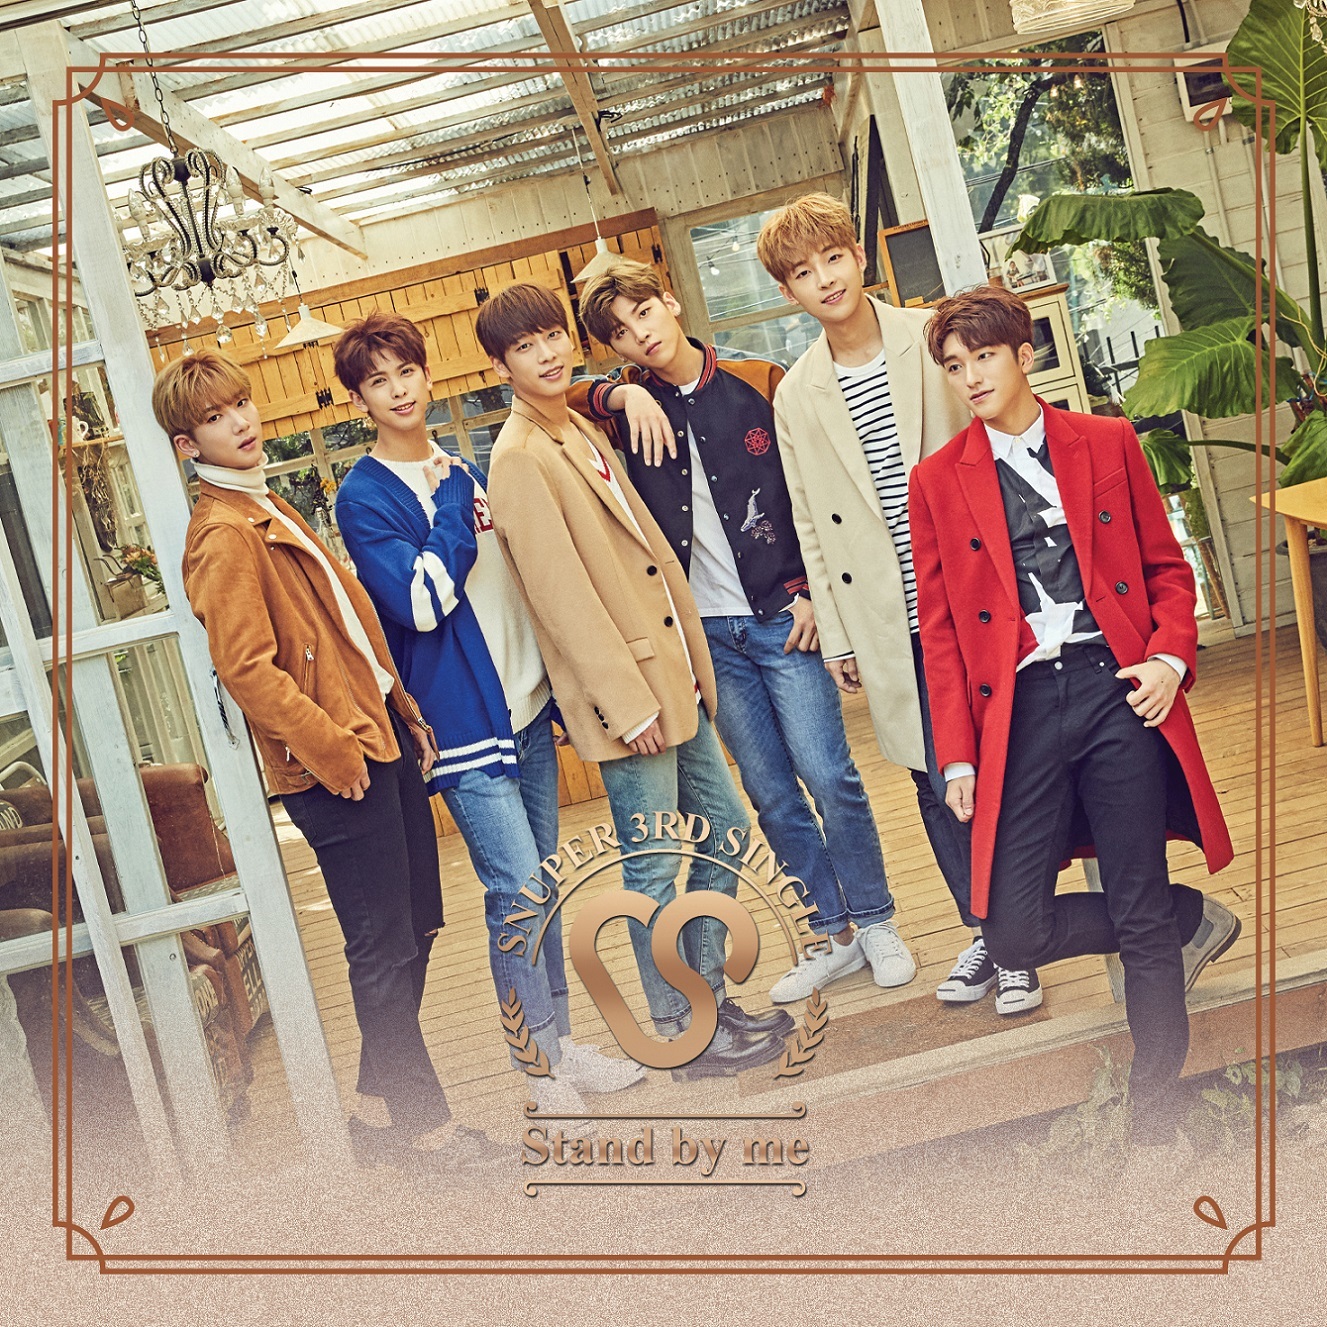 SNUPER 日本 3rd Single『Stand by me』通常盤C